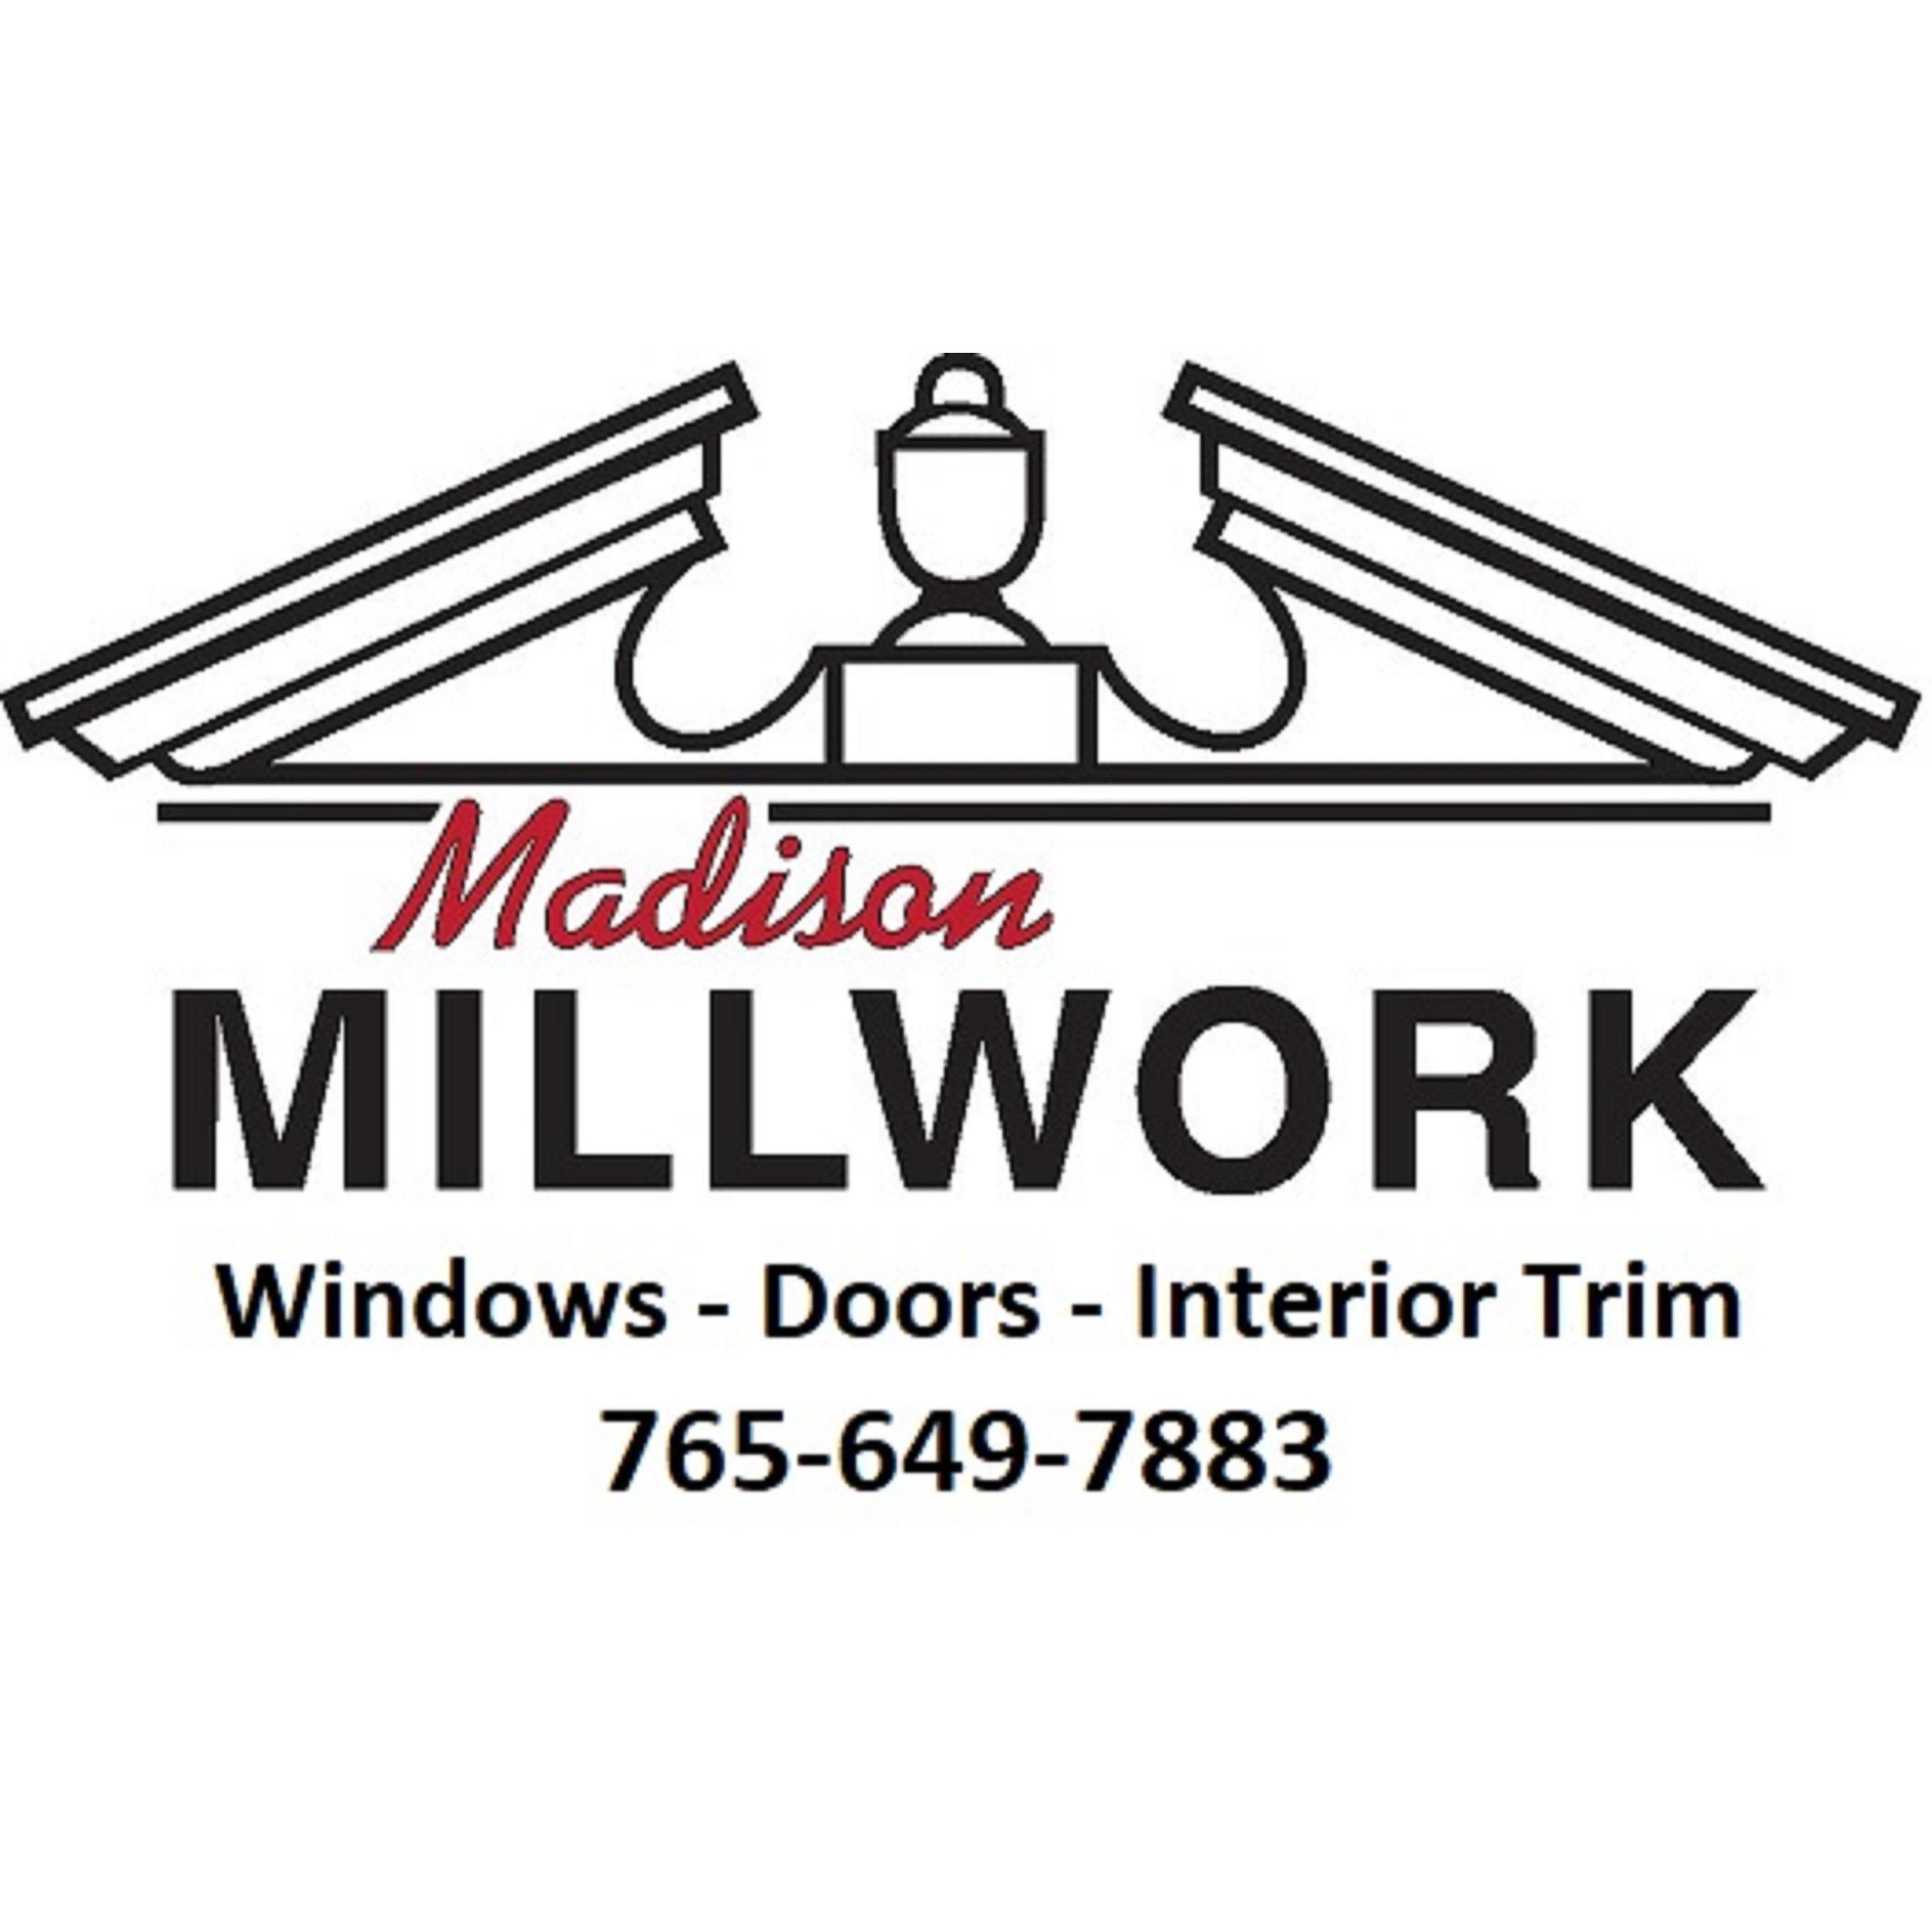 Madison Millwork - Anderson, IN 46016 - (765)649-7883 | ShowMeLocal.com